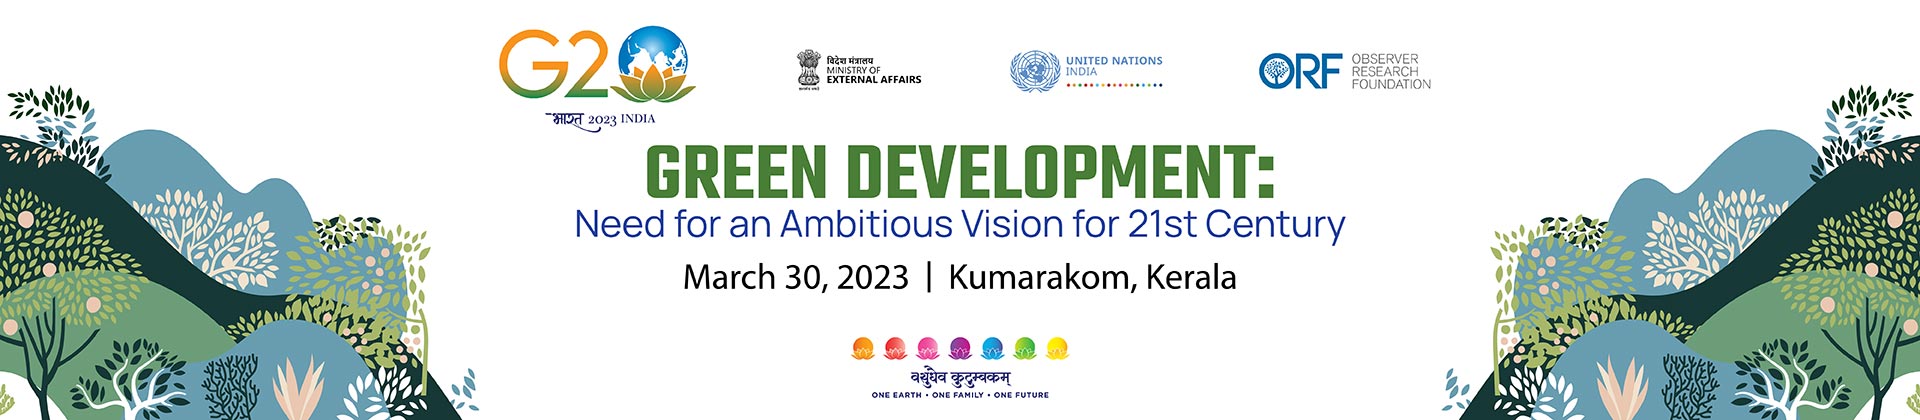 Green Development: Need for an Ambitious Vision for 21st Century